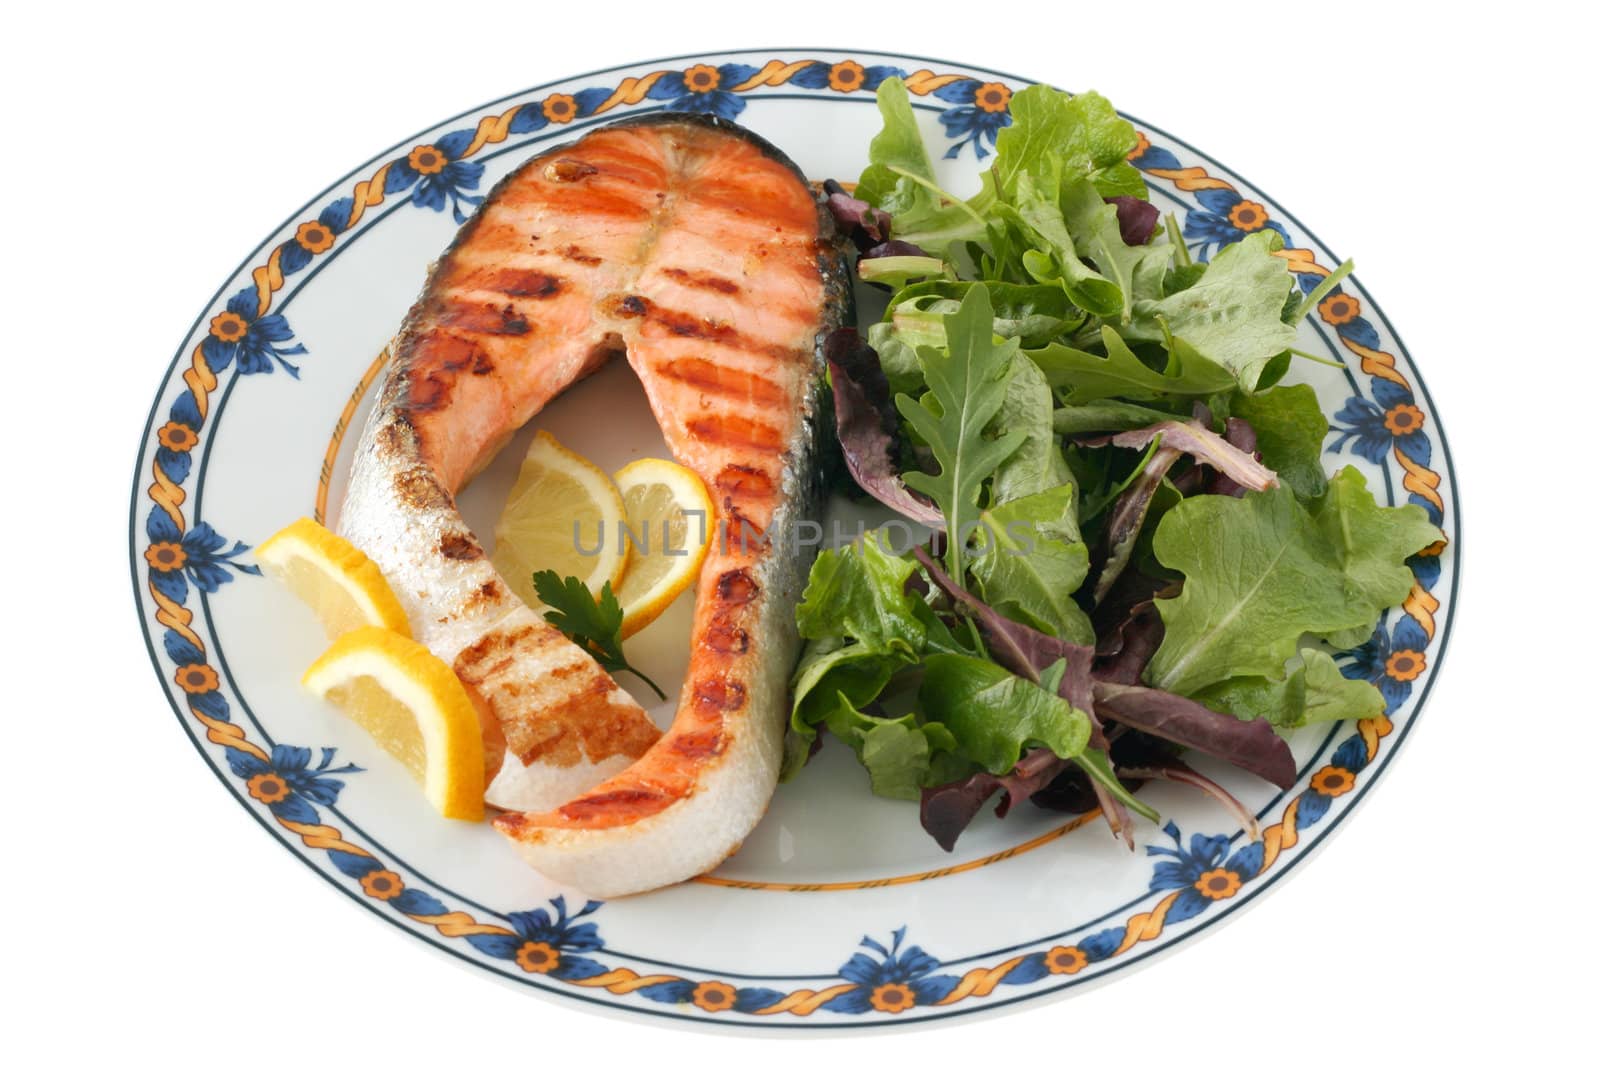 grilled salmon with salad